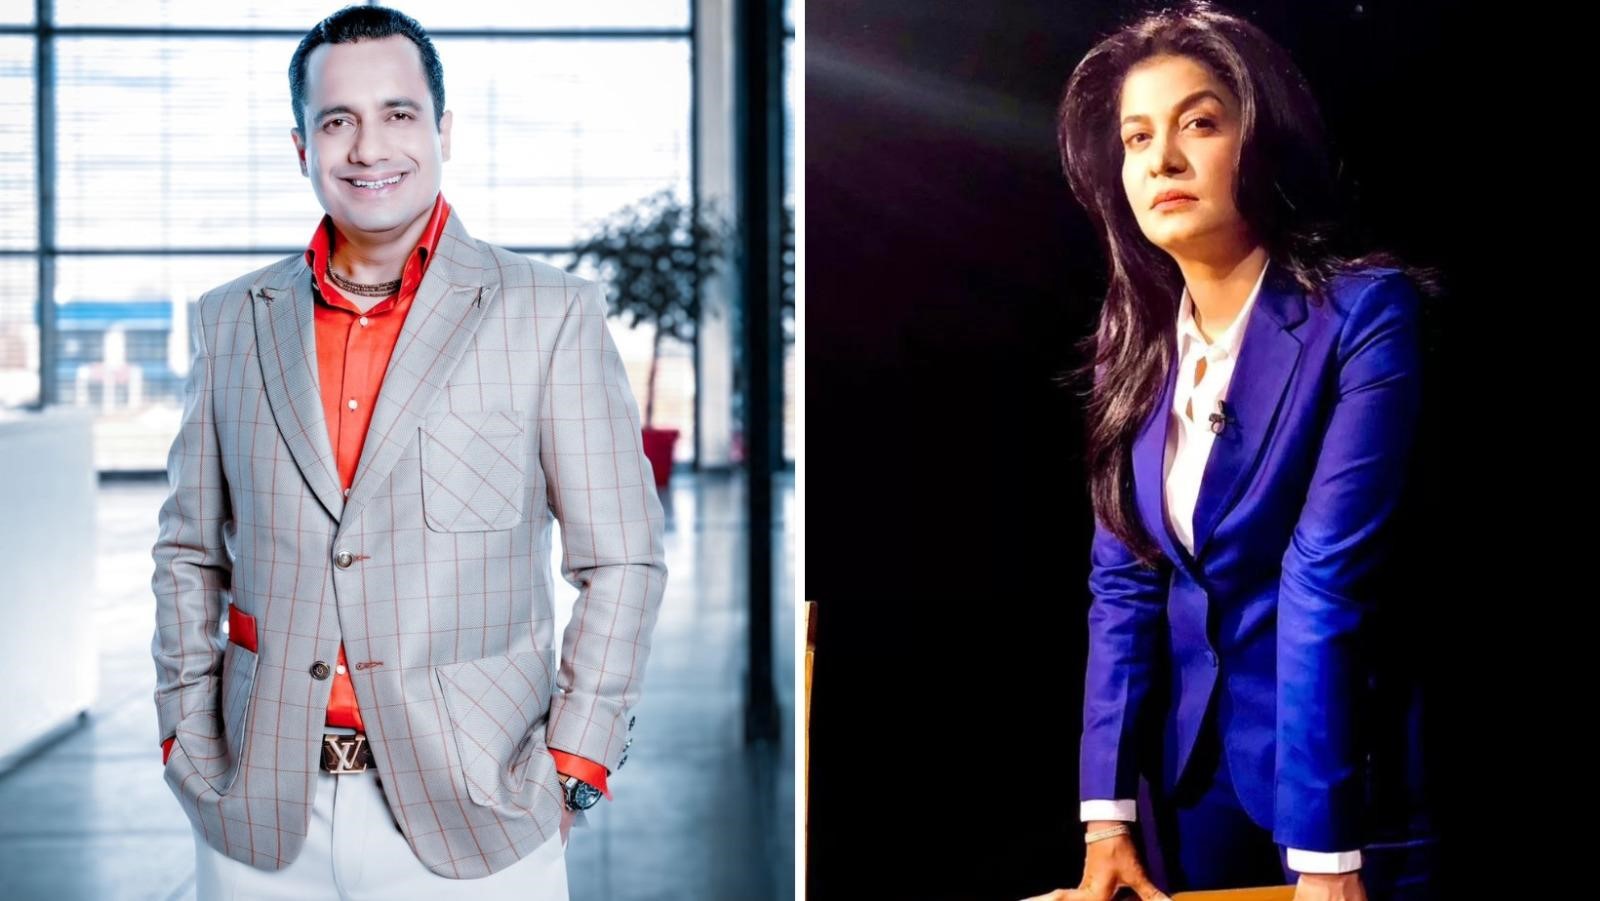 Anjana Om Kashyap's exclusive interview with Dr. Vivek Bindra: Digging deep into the controversies surrounding the motivational speaker